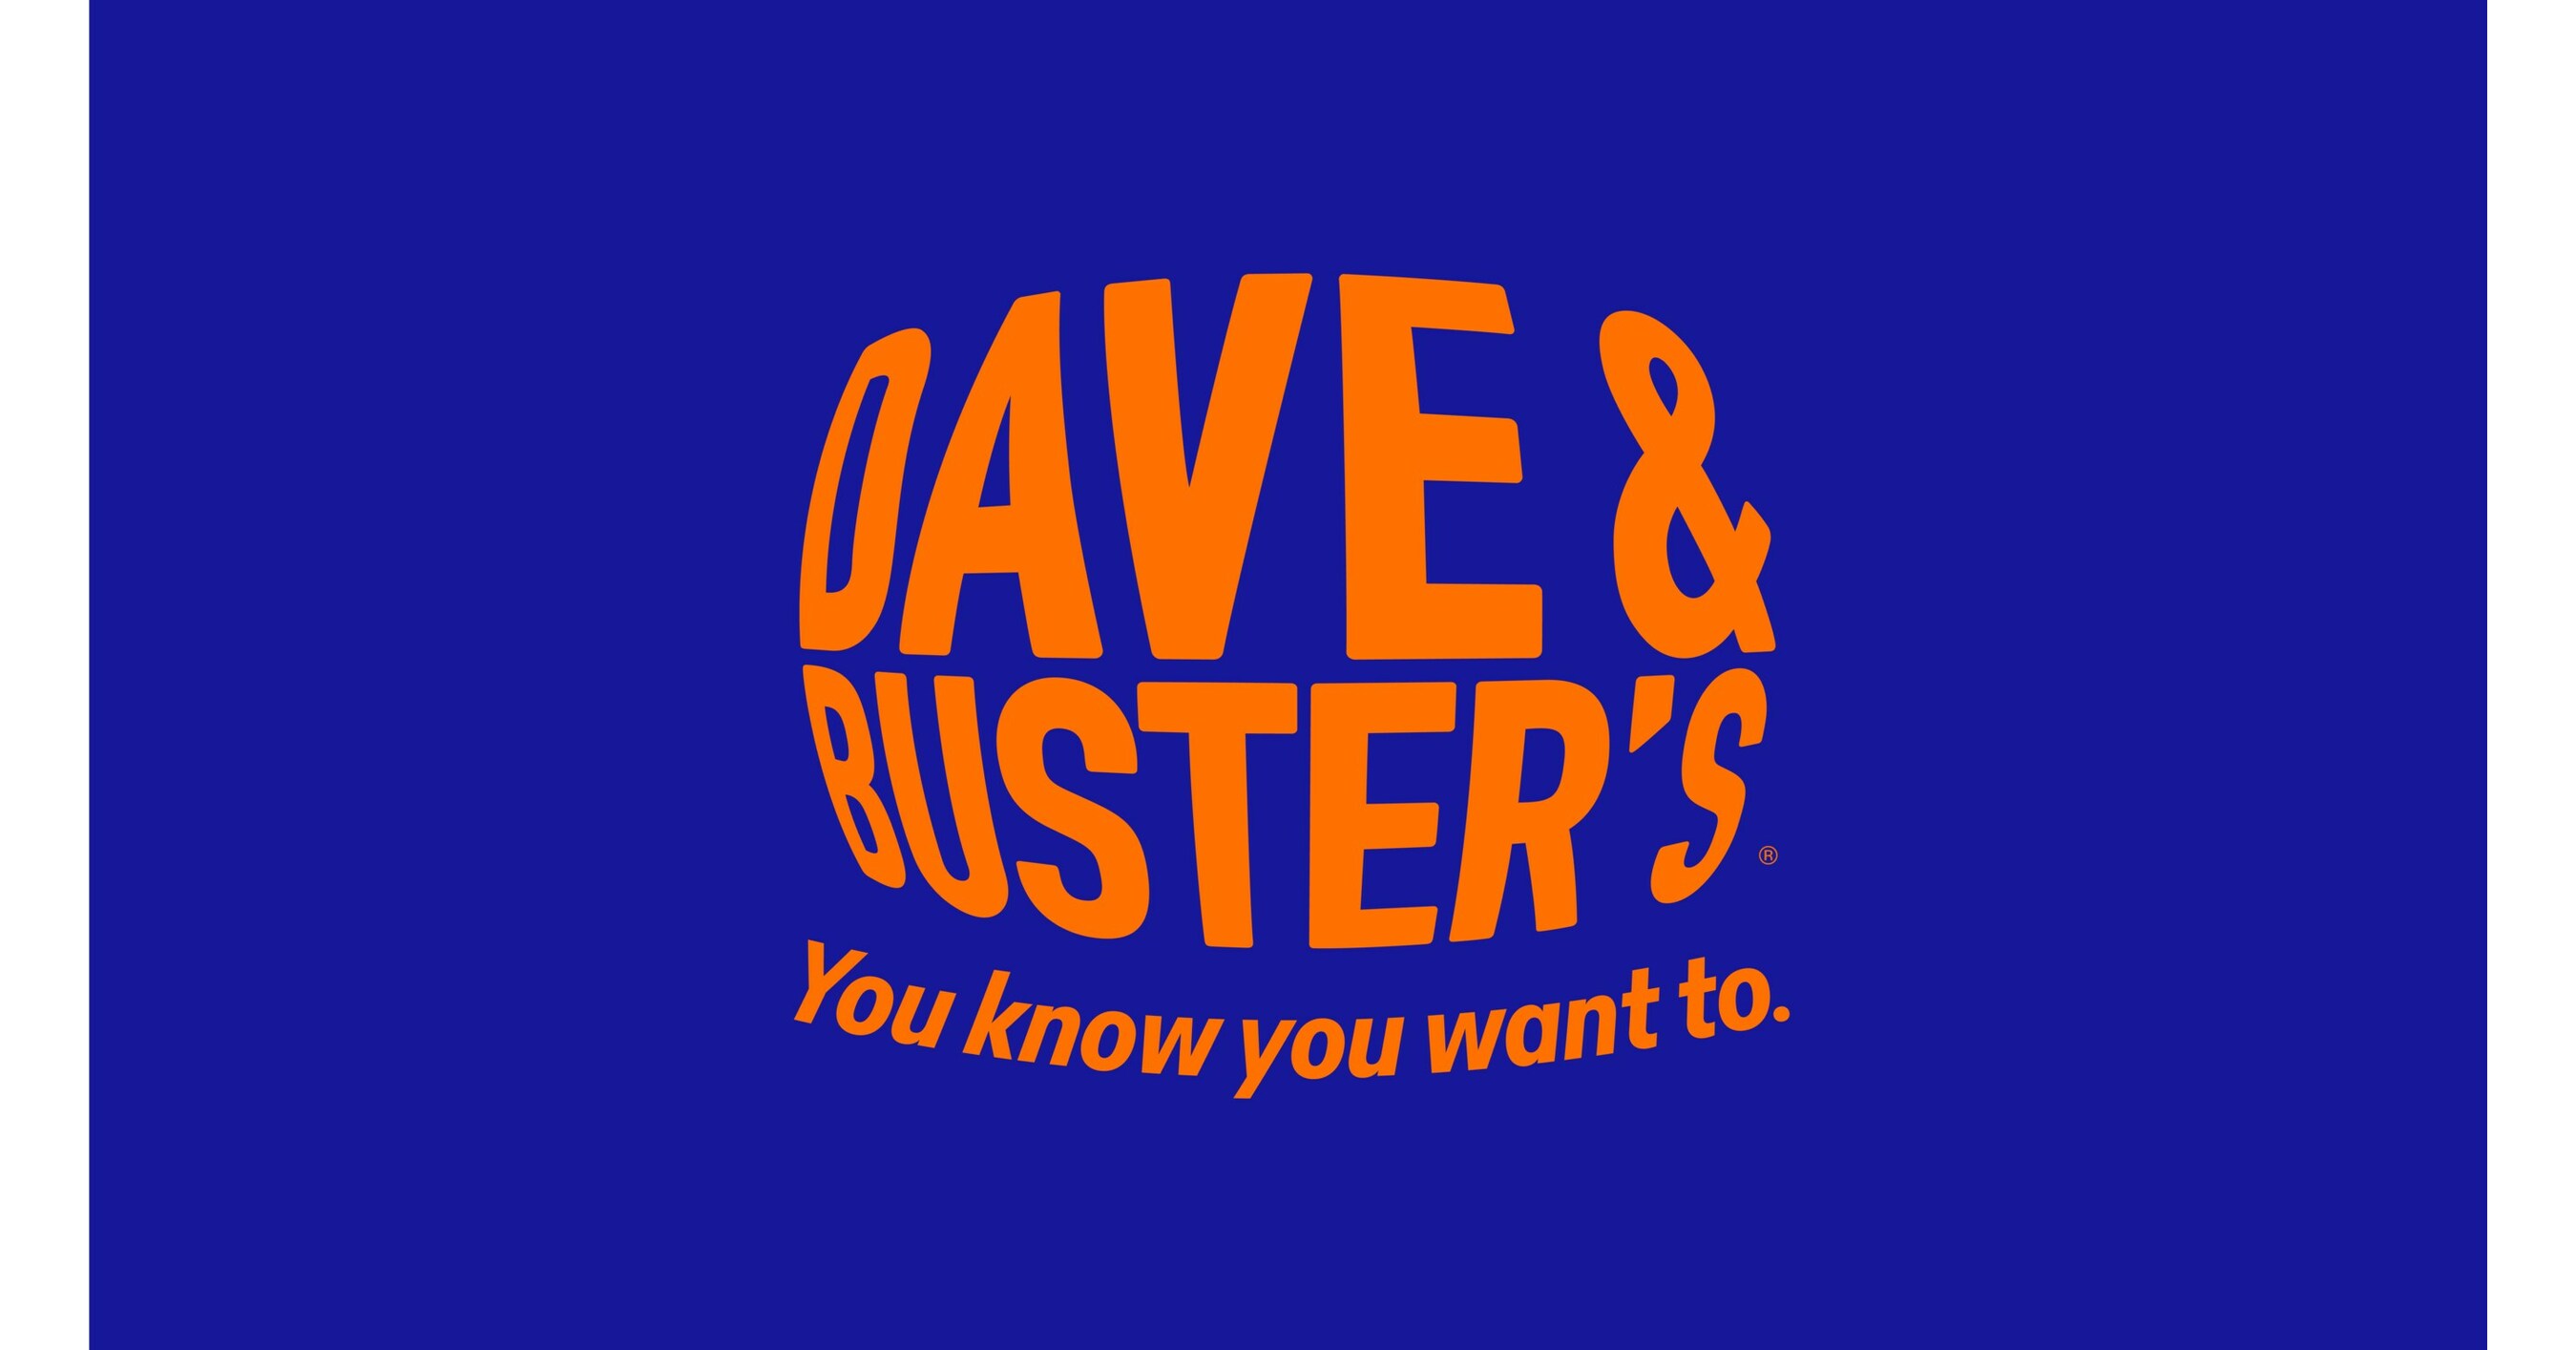 Dave & Buster's - Arcade - All You Need to Know BEFORE You Go